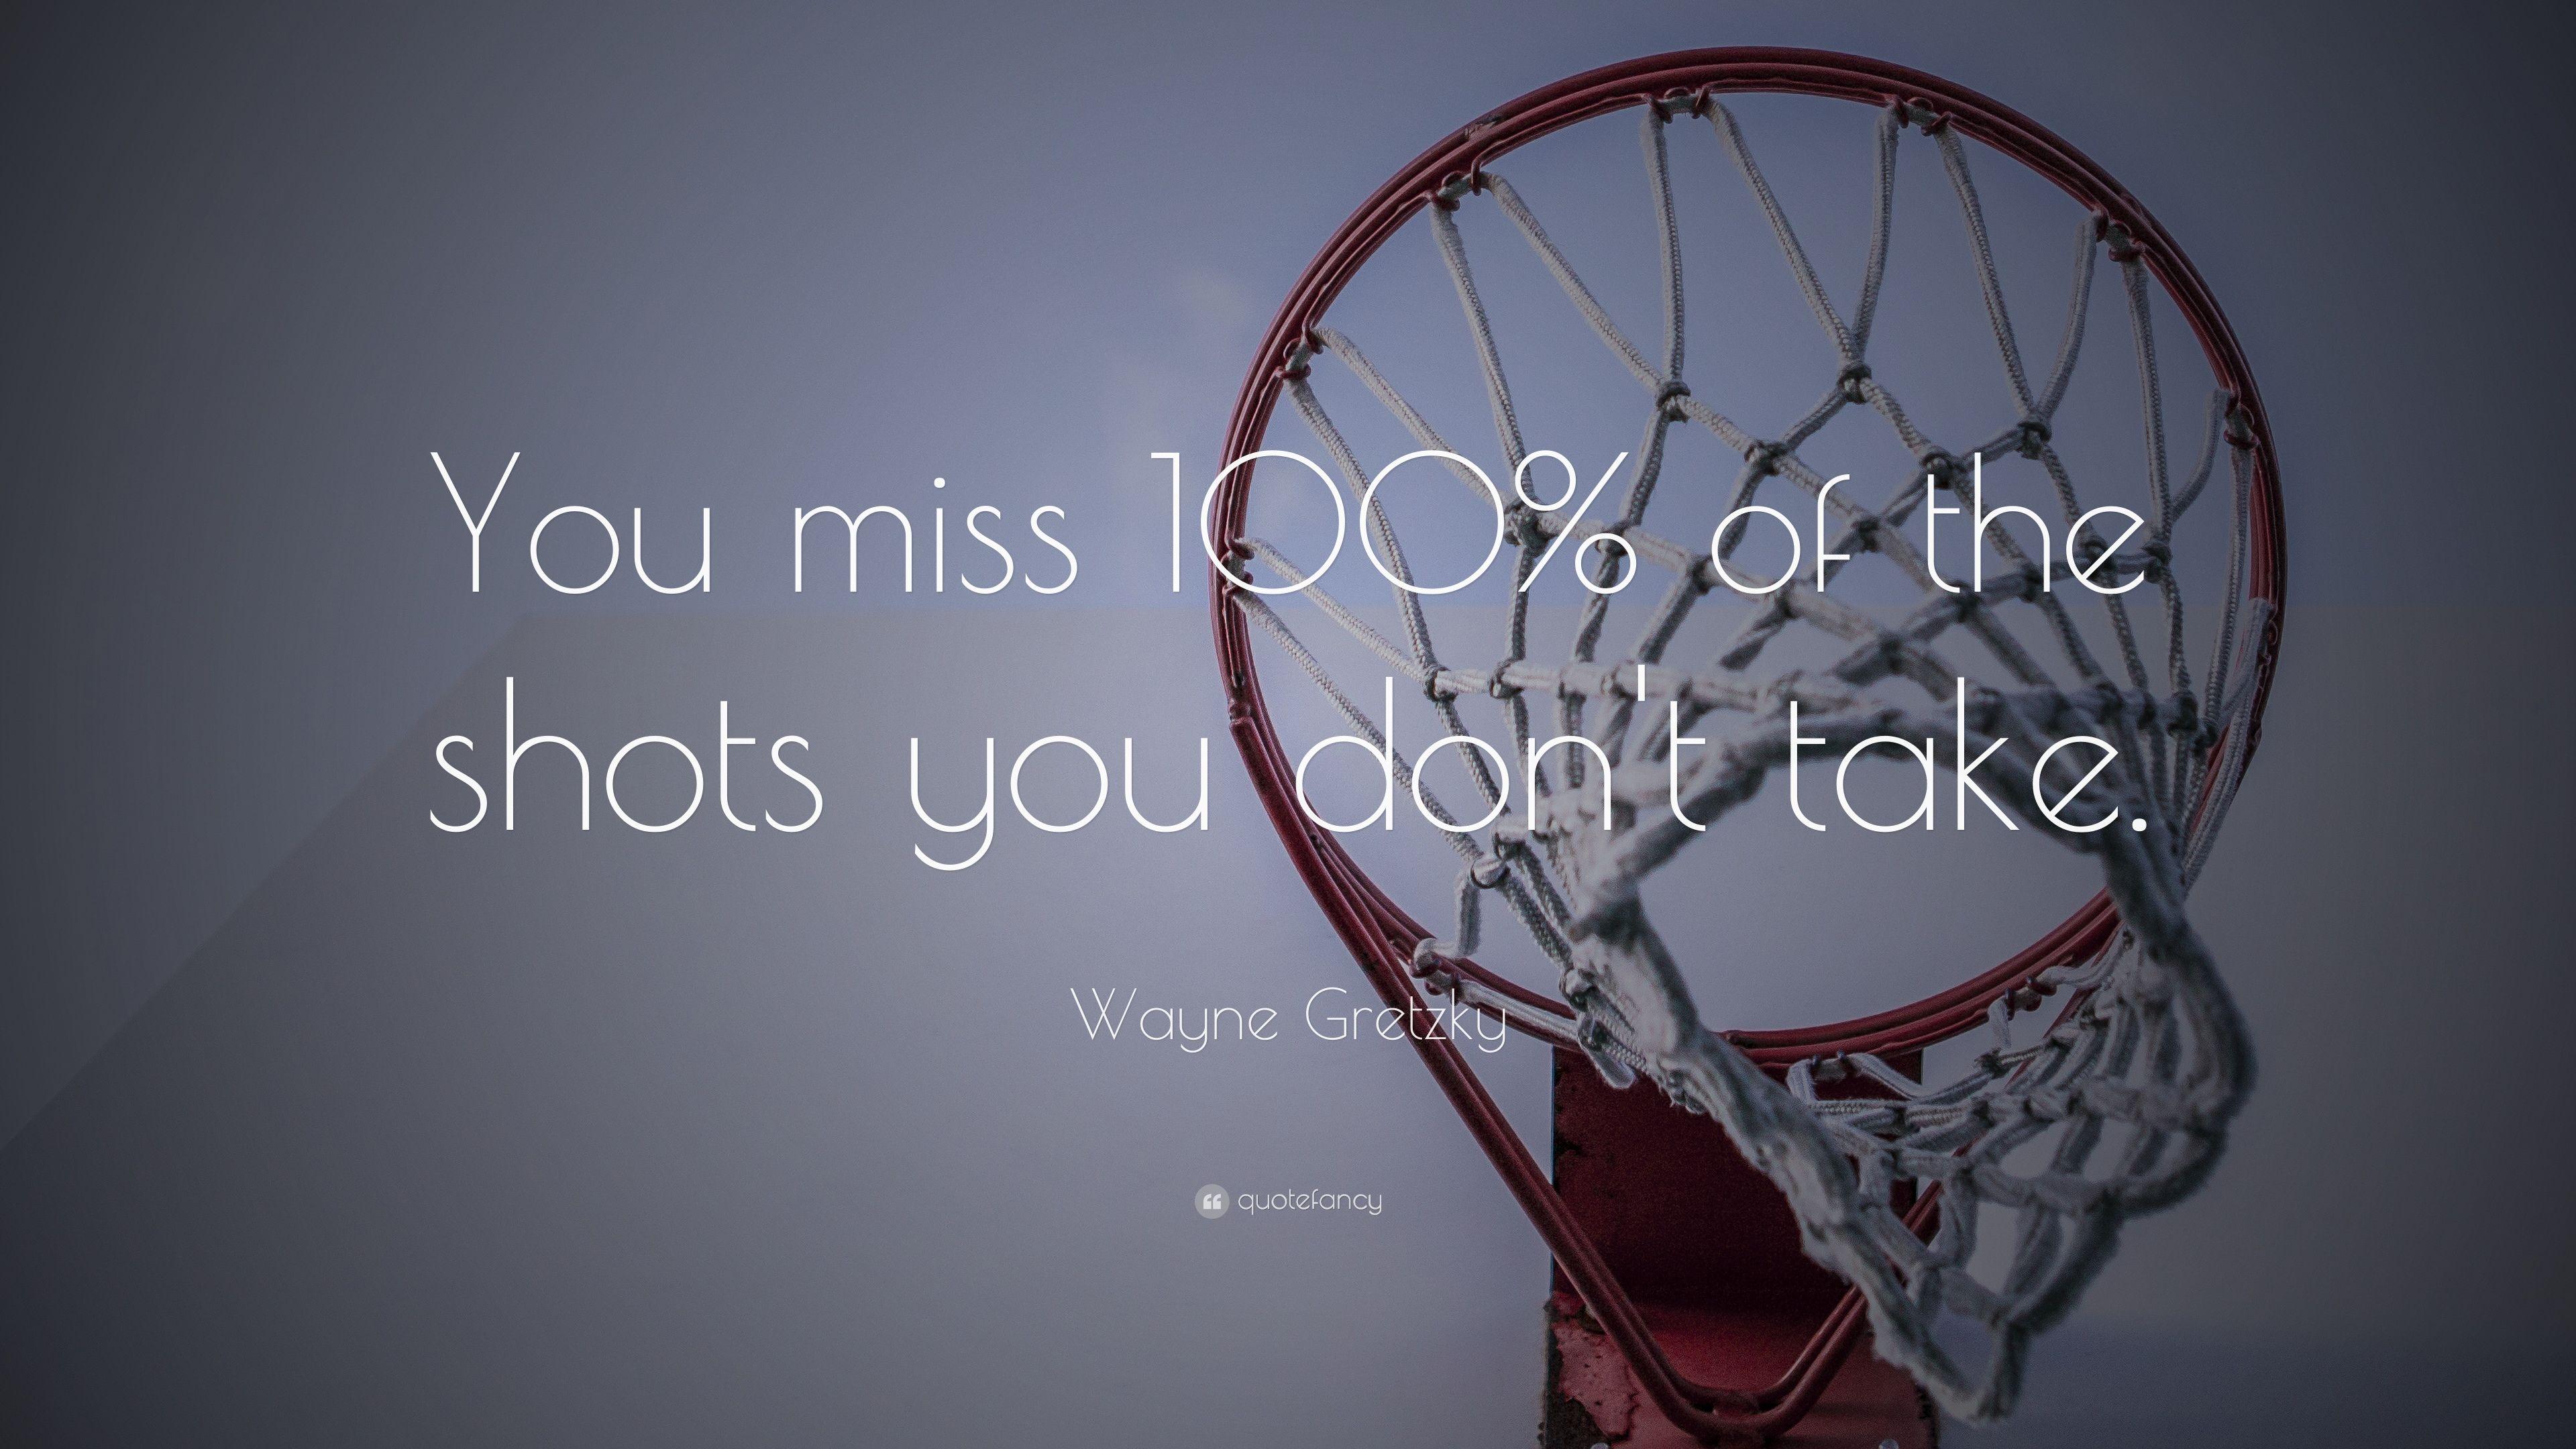 Wayne Gretzky Quote: “You miss 100% of the shots you don't take